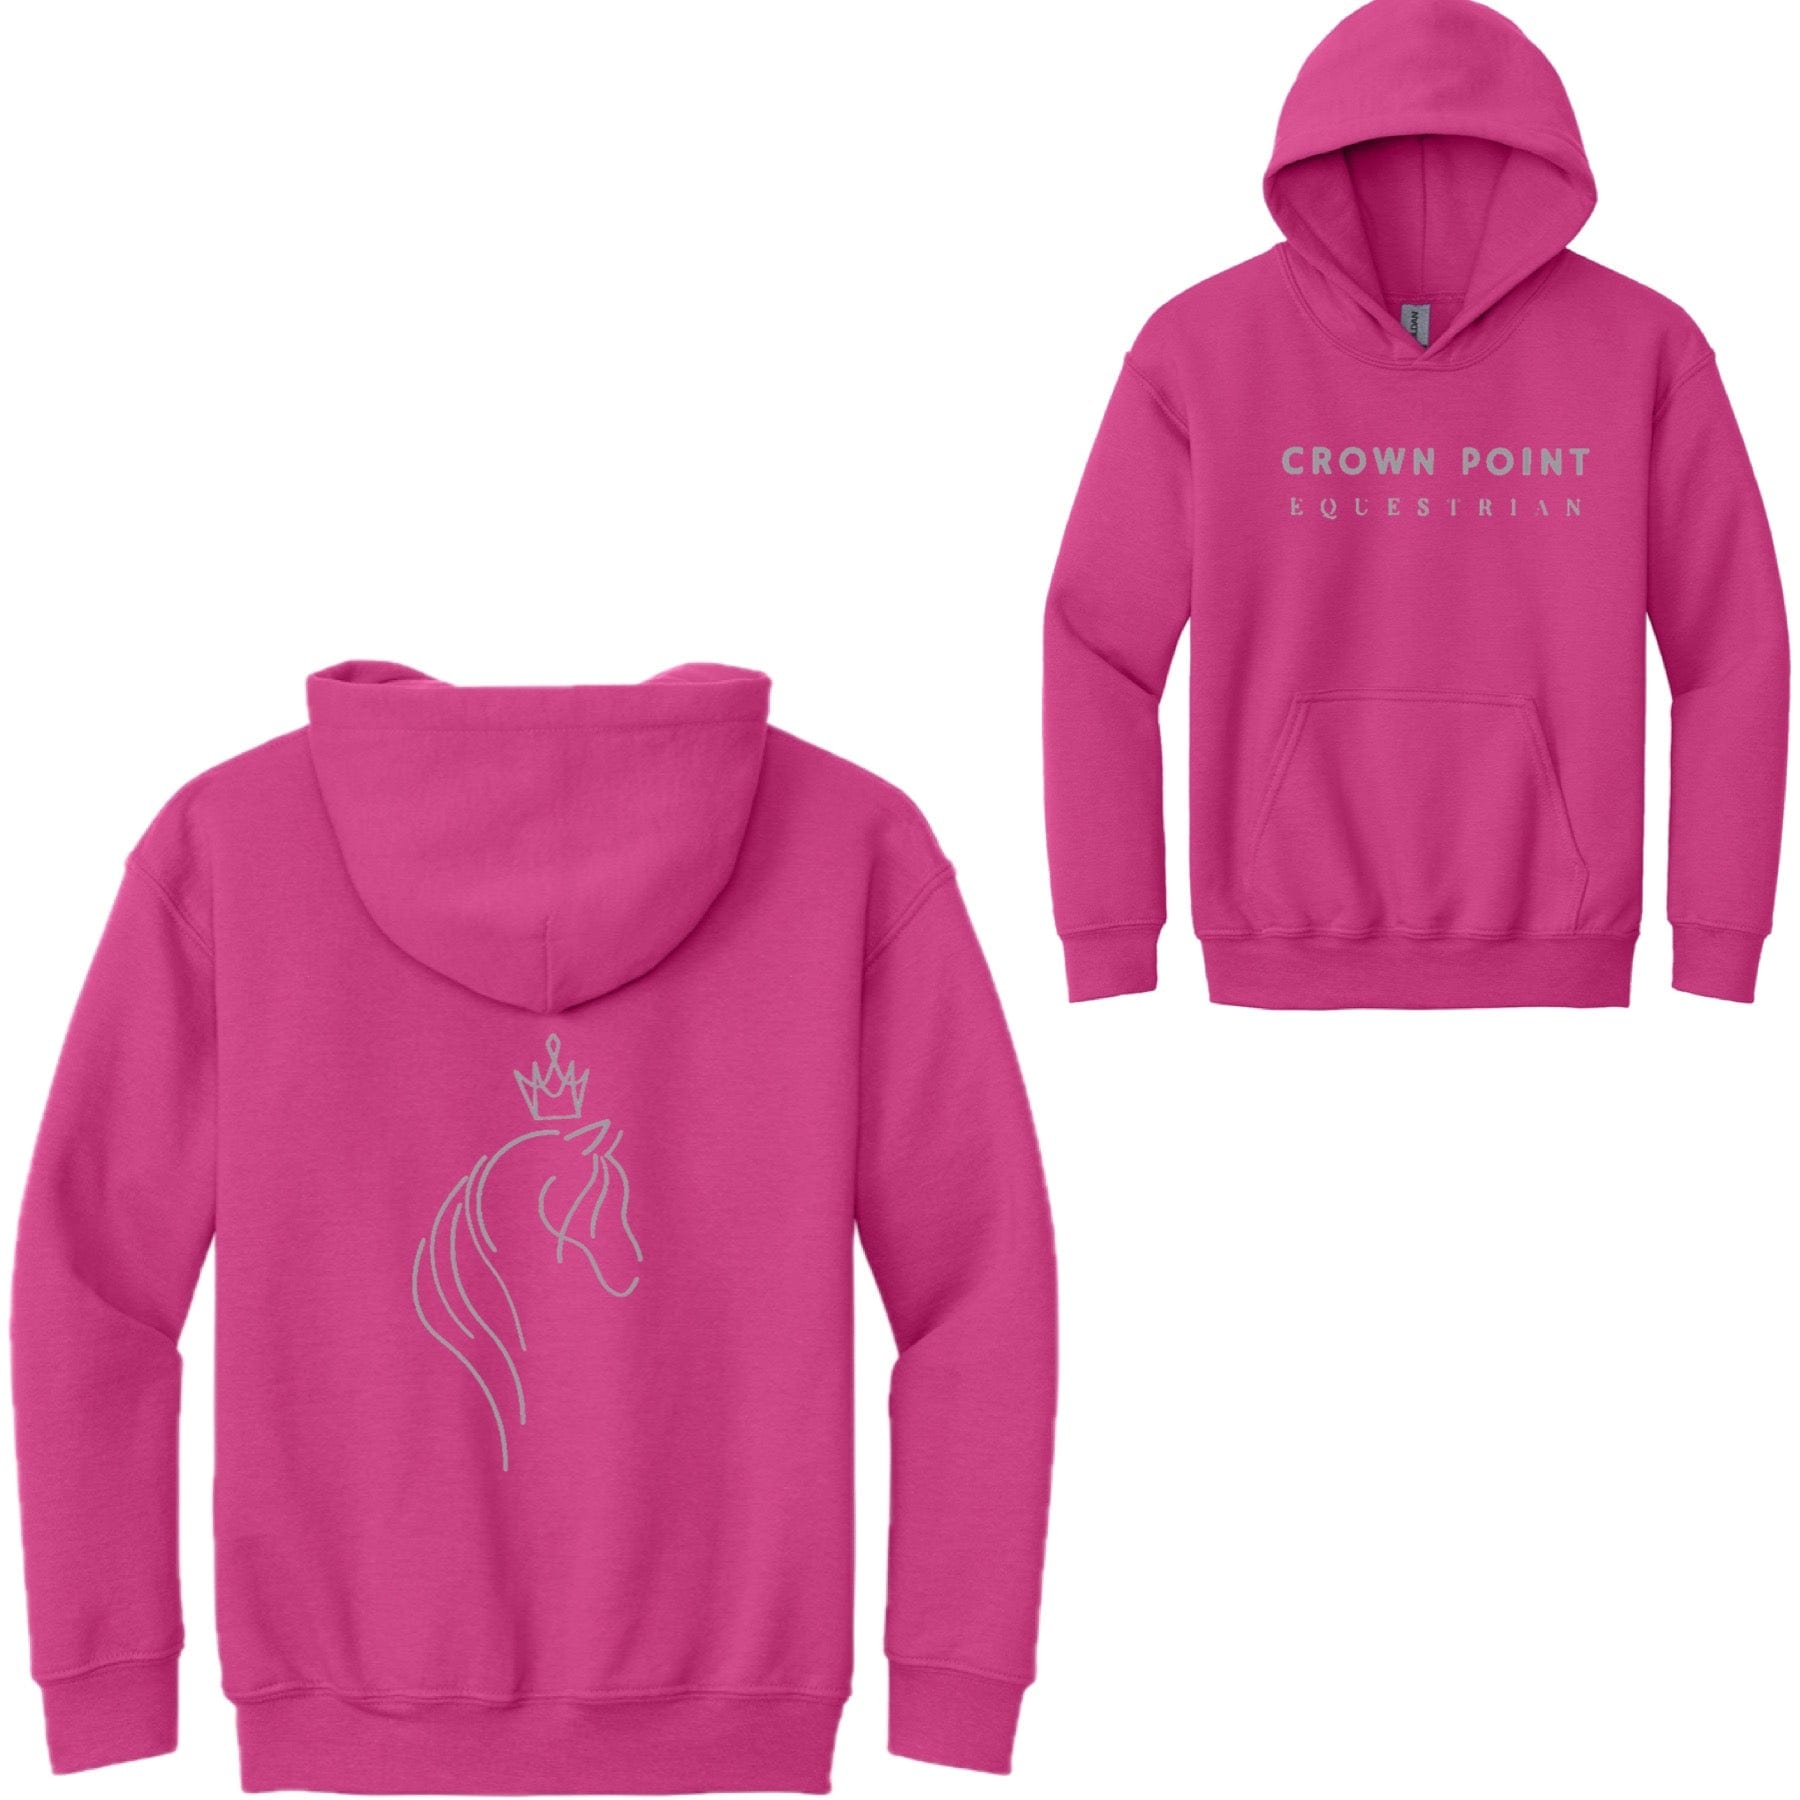 Equestrian Team Apparel Crown Point Equestrian Hoodie equestrian team apparel online tack store mobile tack store custom farm apparel custom show stable clothing equestrian lifestyle horse show clothing riding clothes horses equestrian tack store